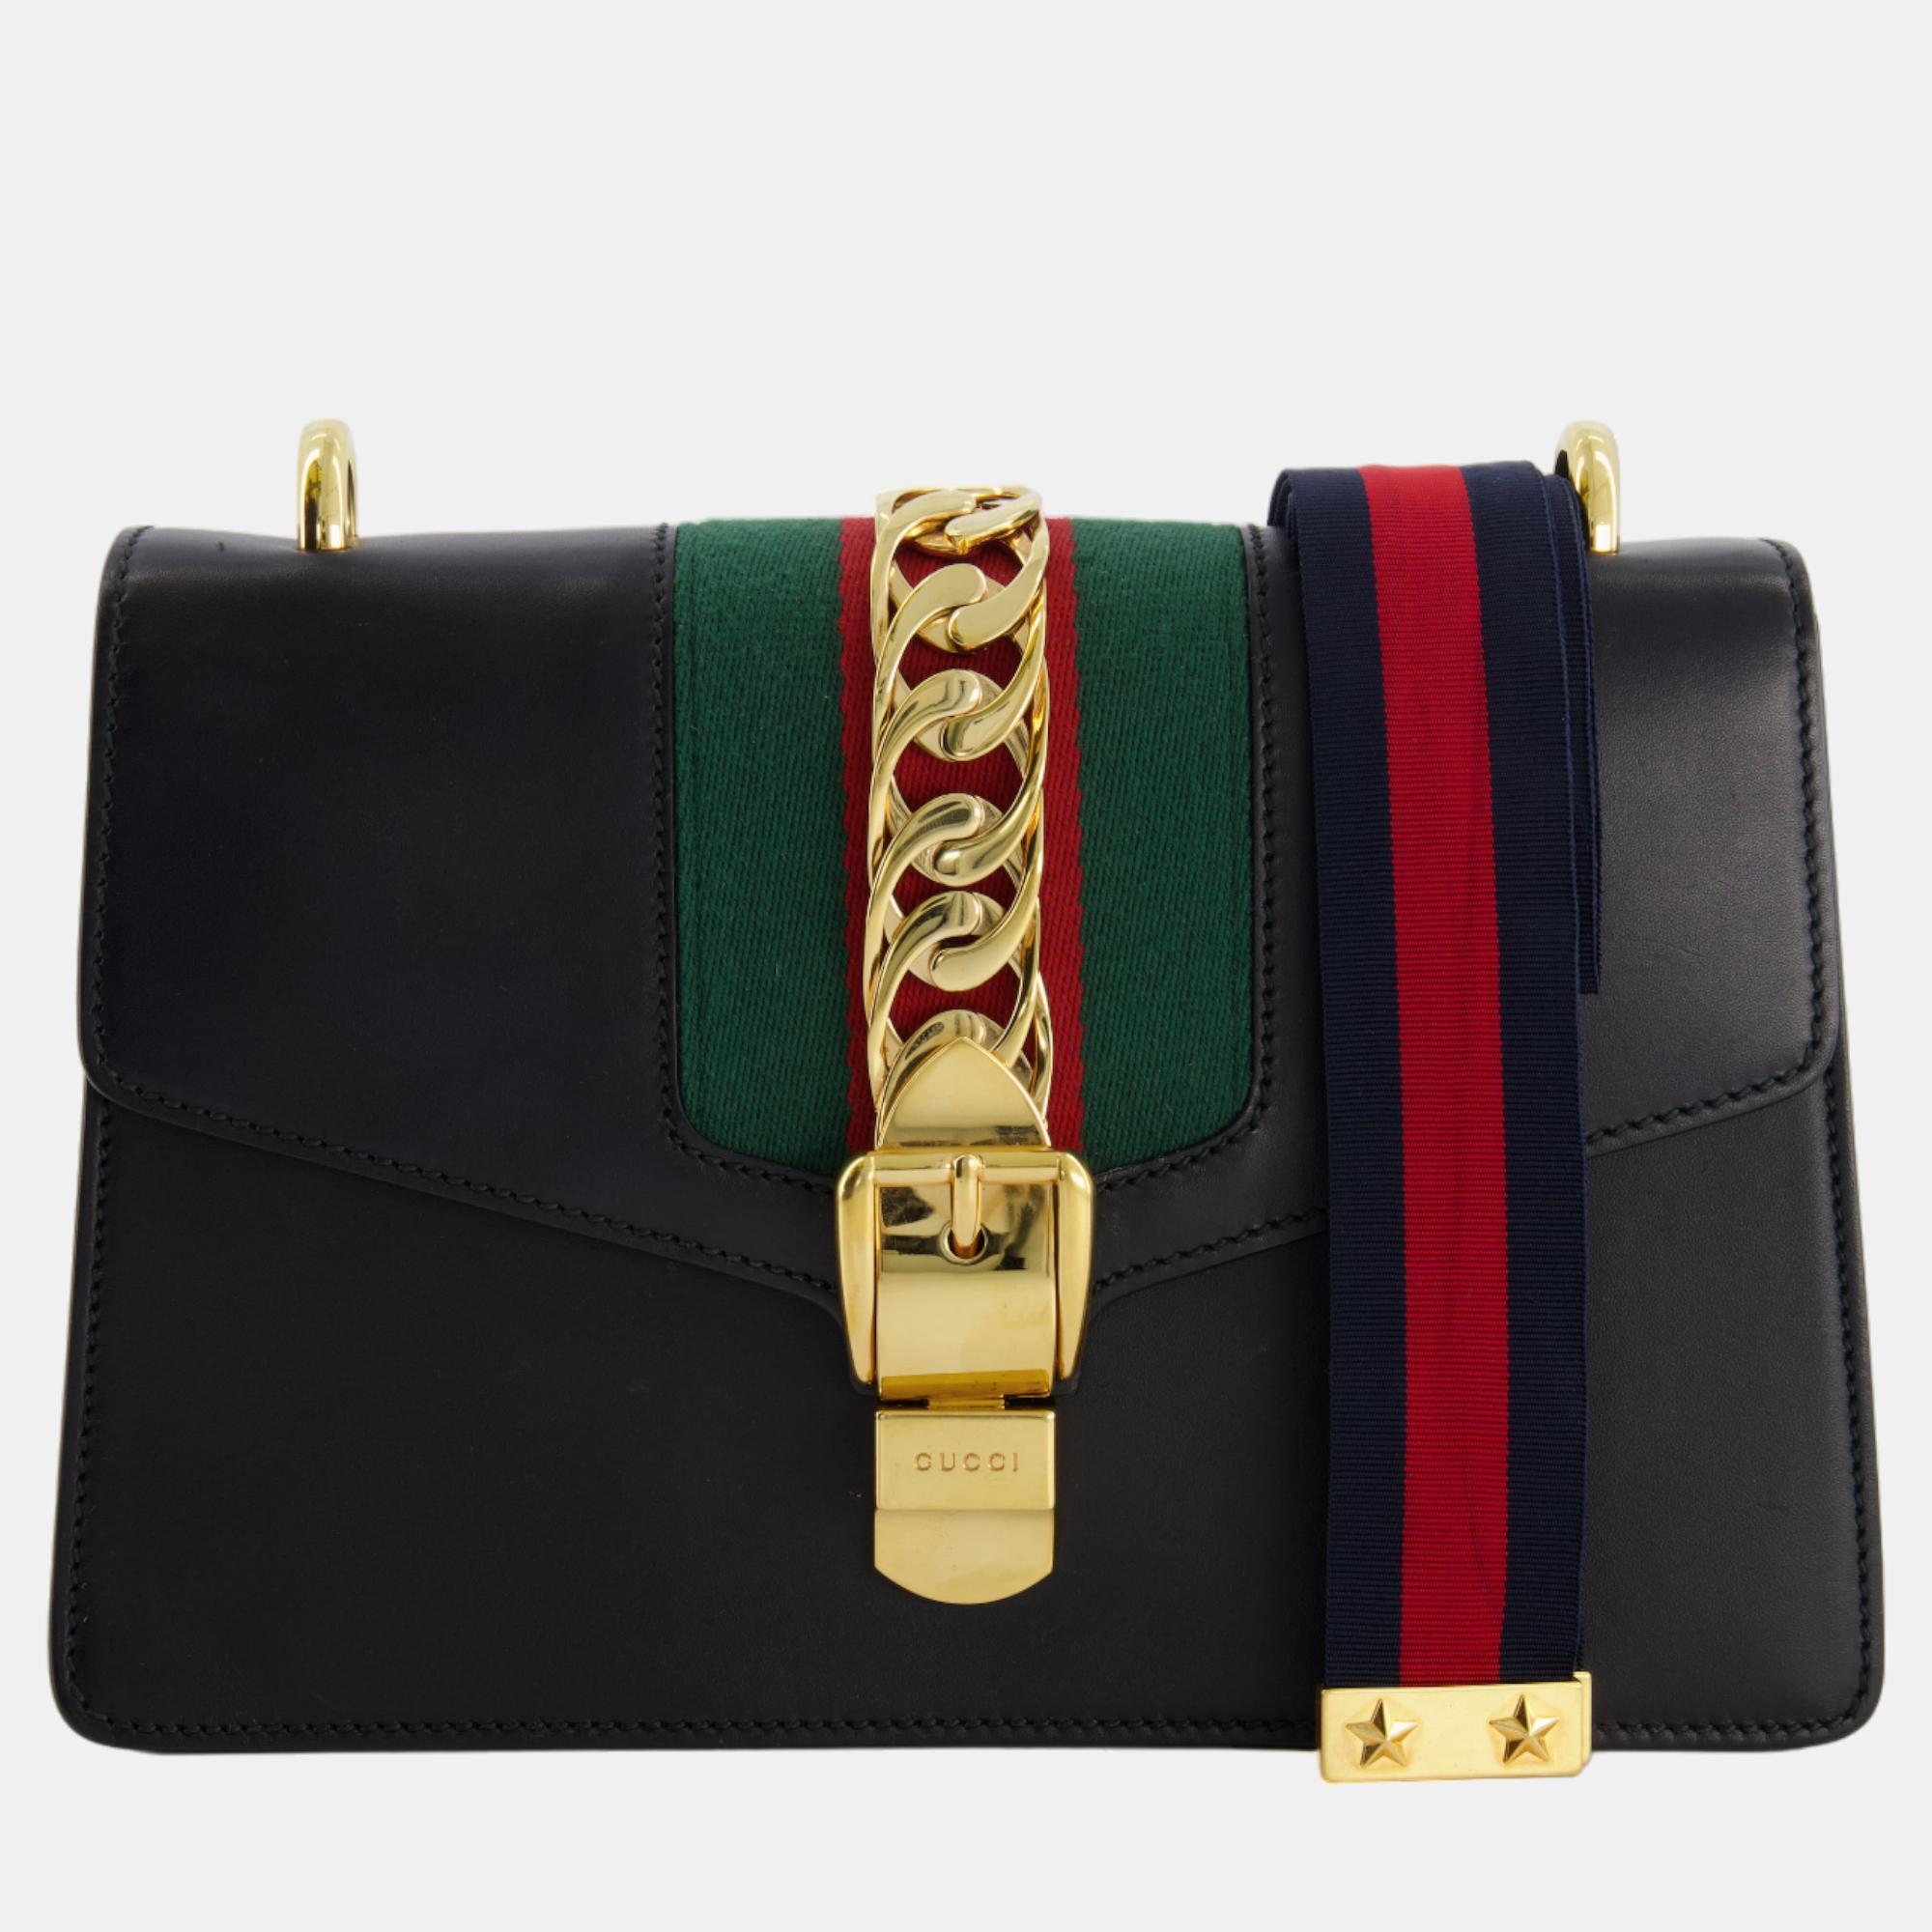 Gucci black leather small sylvie bag canvas with gold hardware and canvas strap